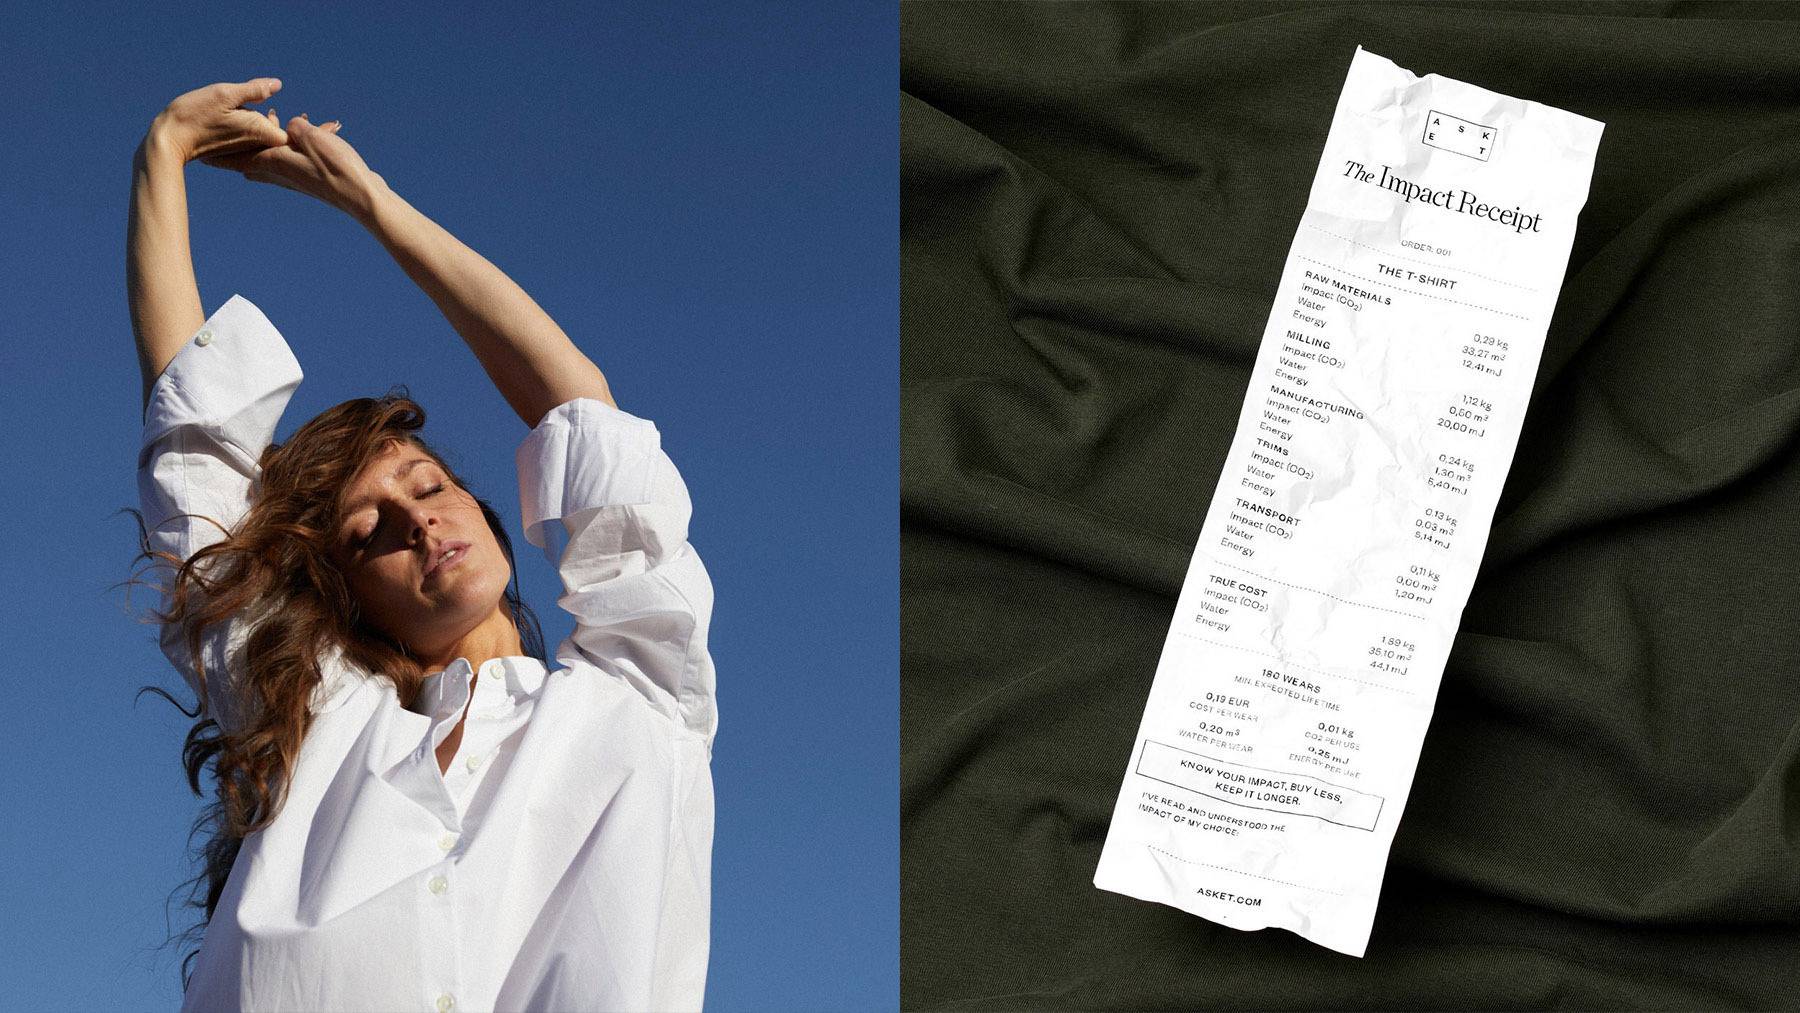 Asket’s “Impact Receipt” gives shoppers a breakdown of the environmental impact of its clothes.